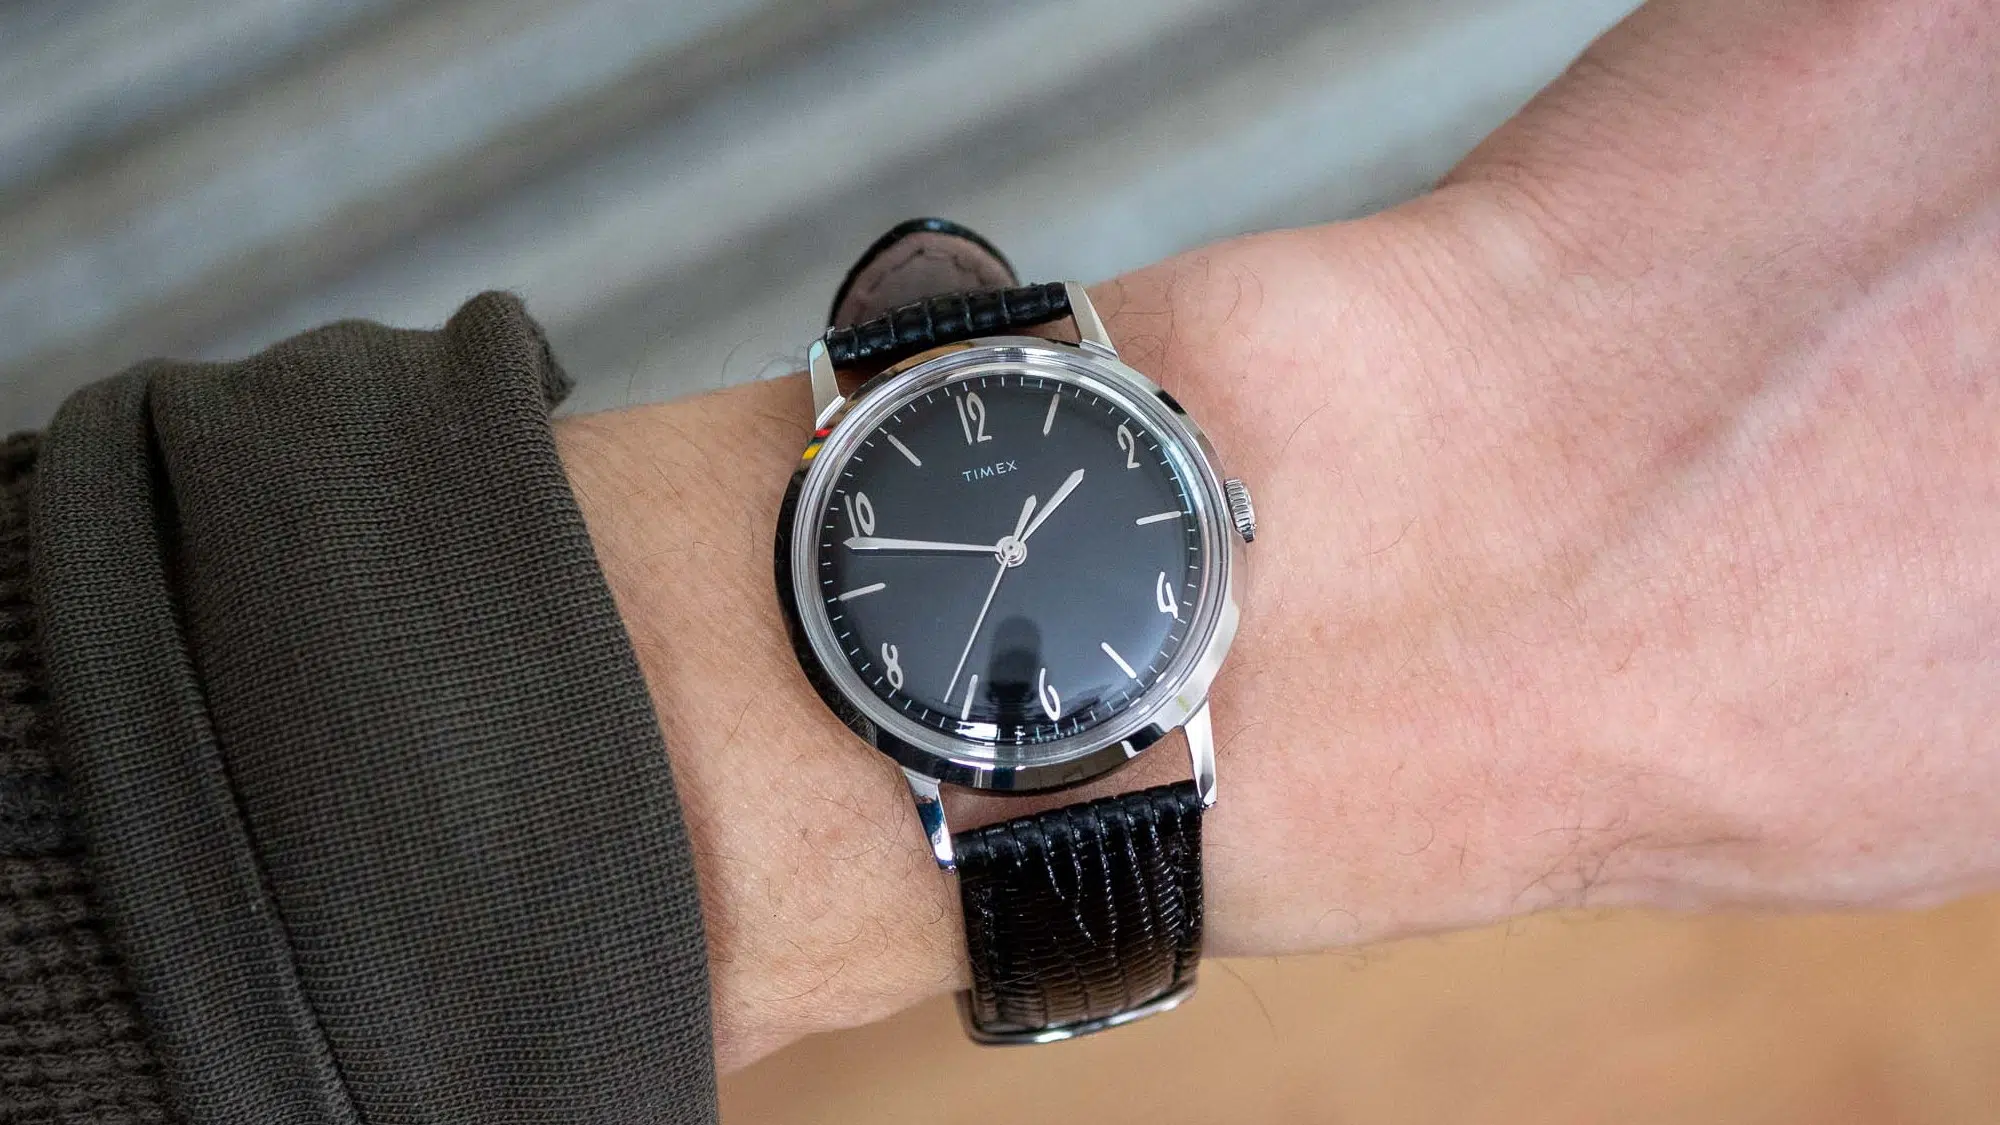 The 15 Best Minimalist Watches for Small Wrists